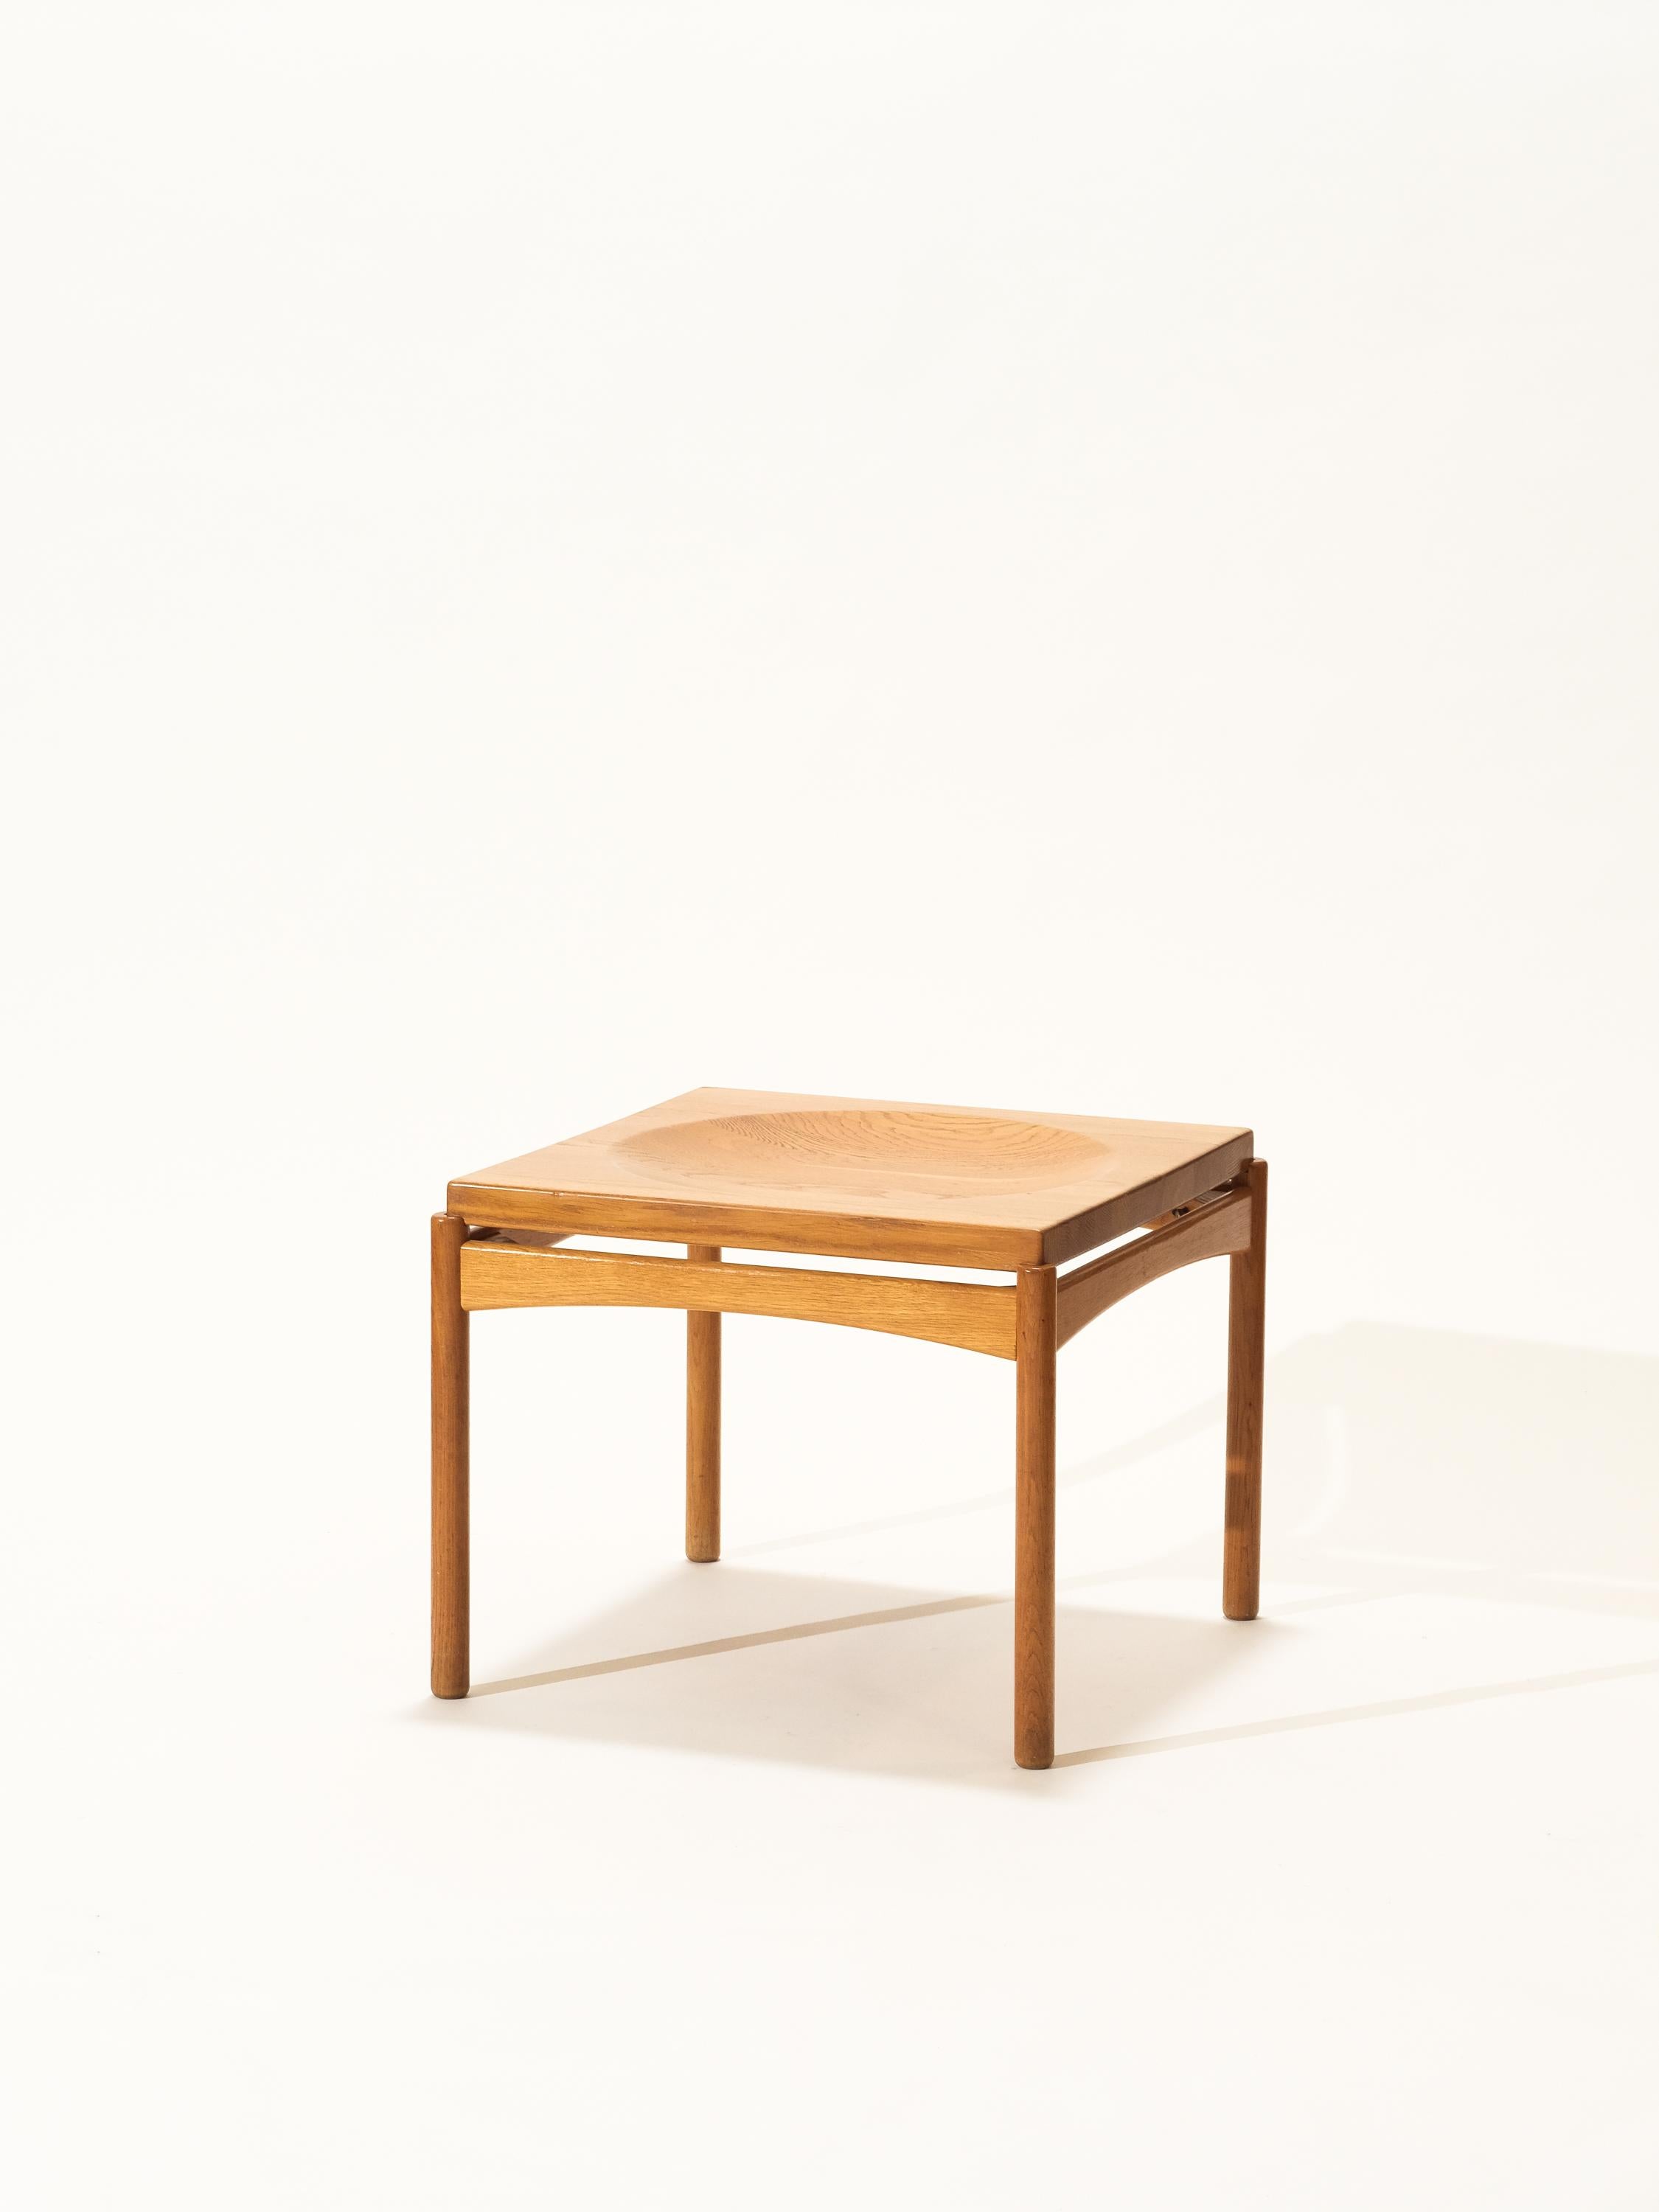 Oak coffee table designed by Gunnar Myrstrand for Källemo, Sweden circa 1960s.

A robust yet elegant blonde coffee table. A thick solid oak top on a solid oak frame that shows off the beautiful wood grain. Top can be flipped, other side is a tray